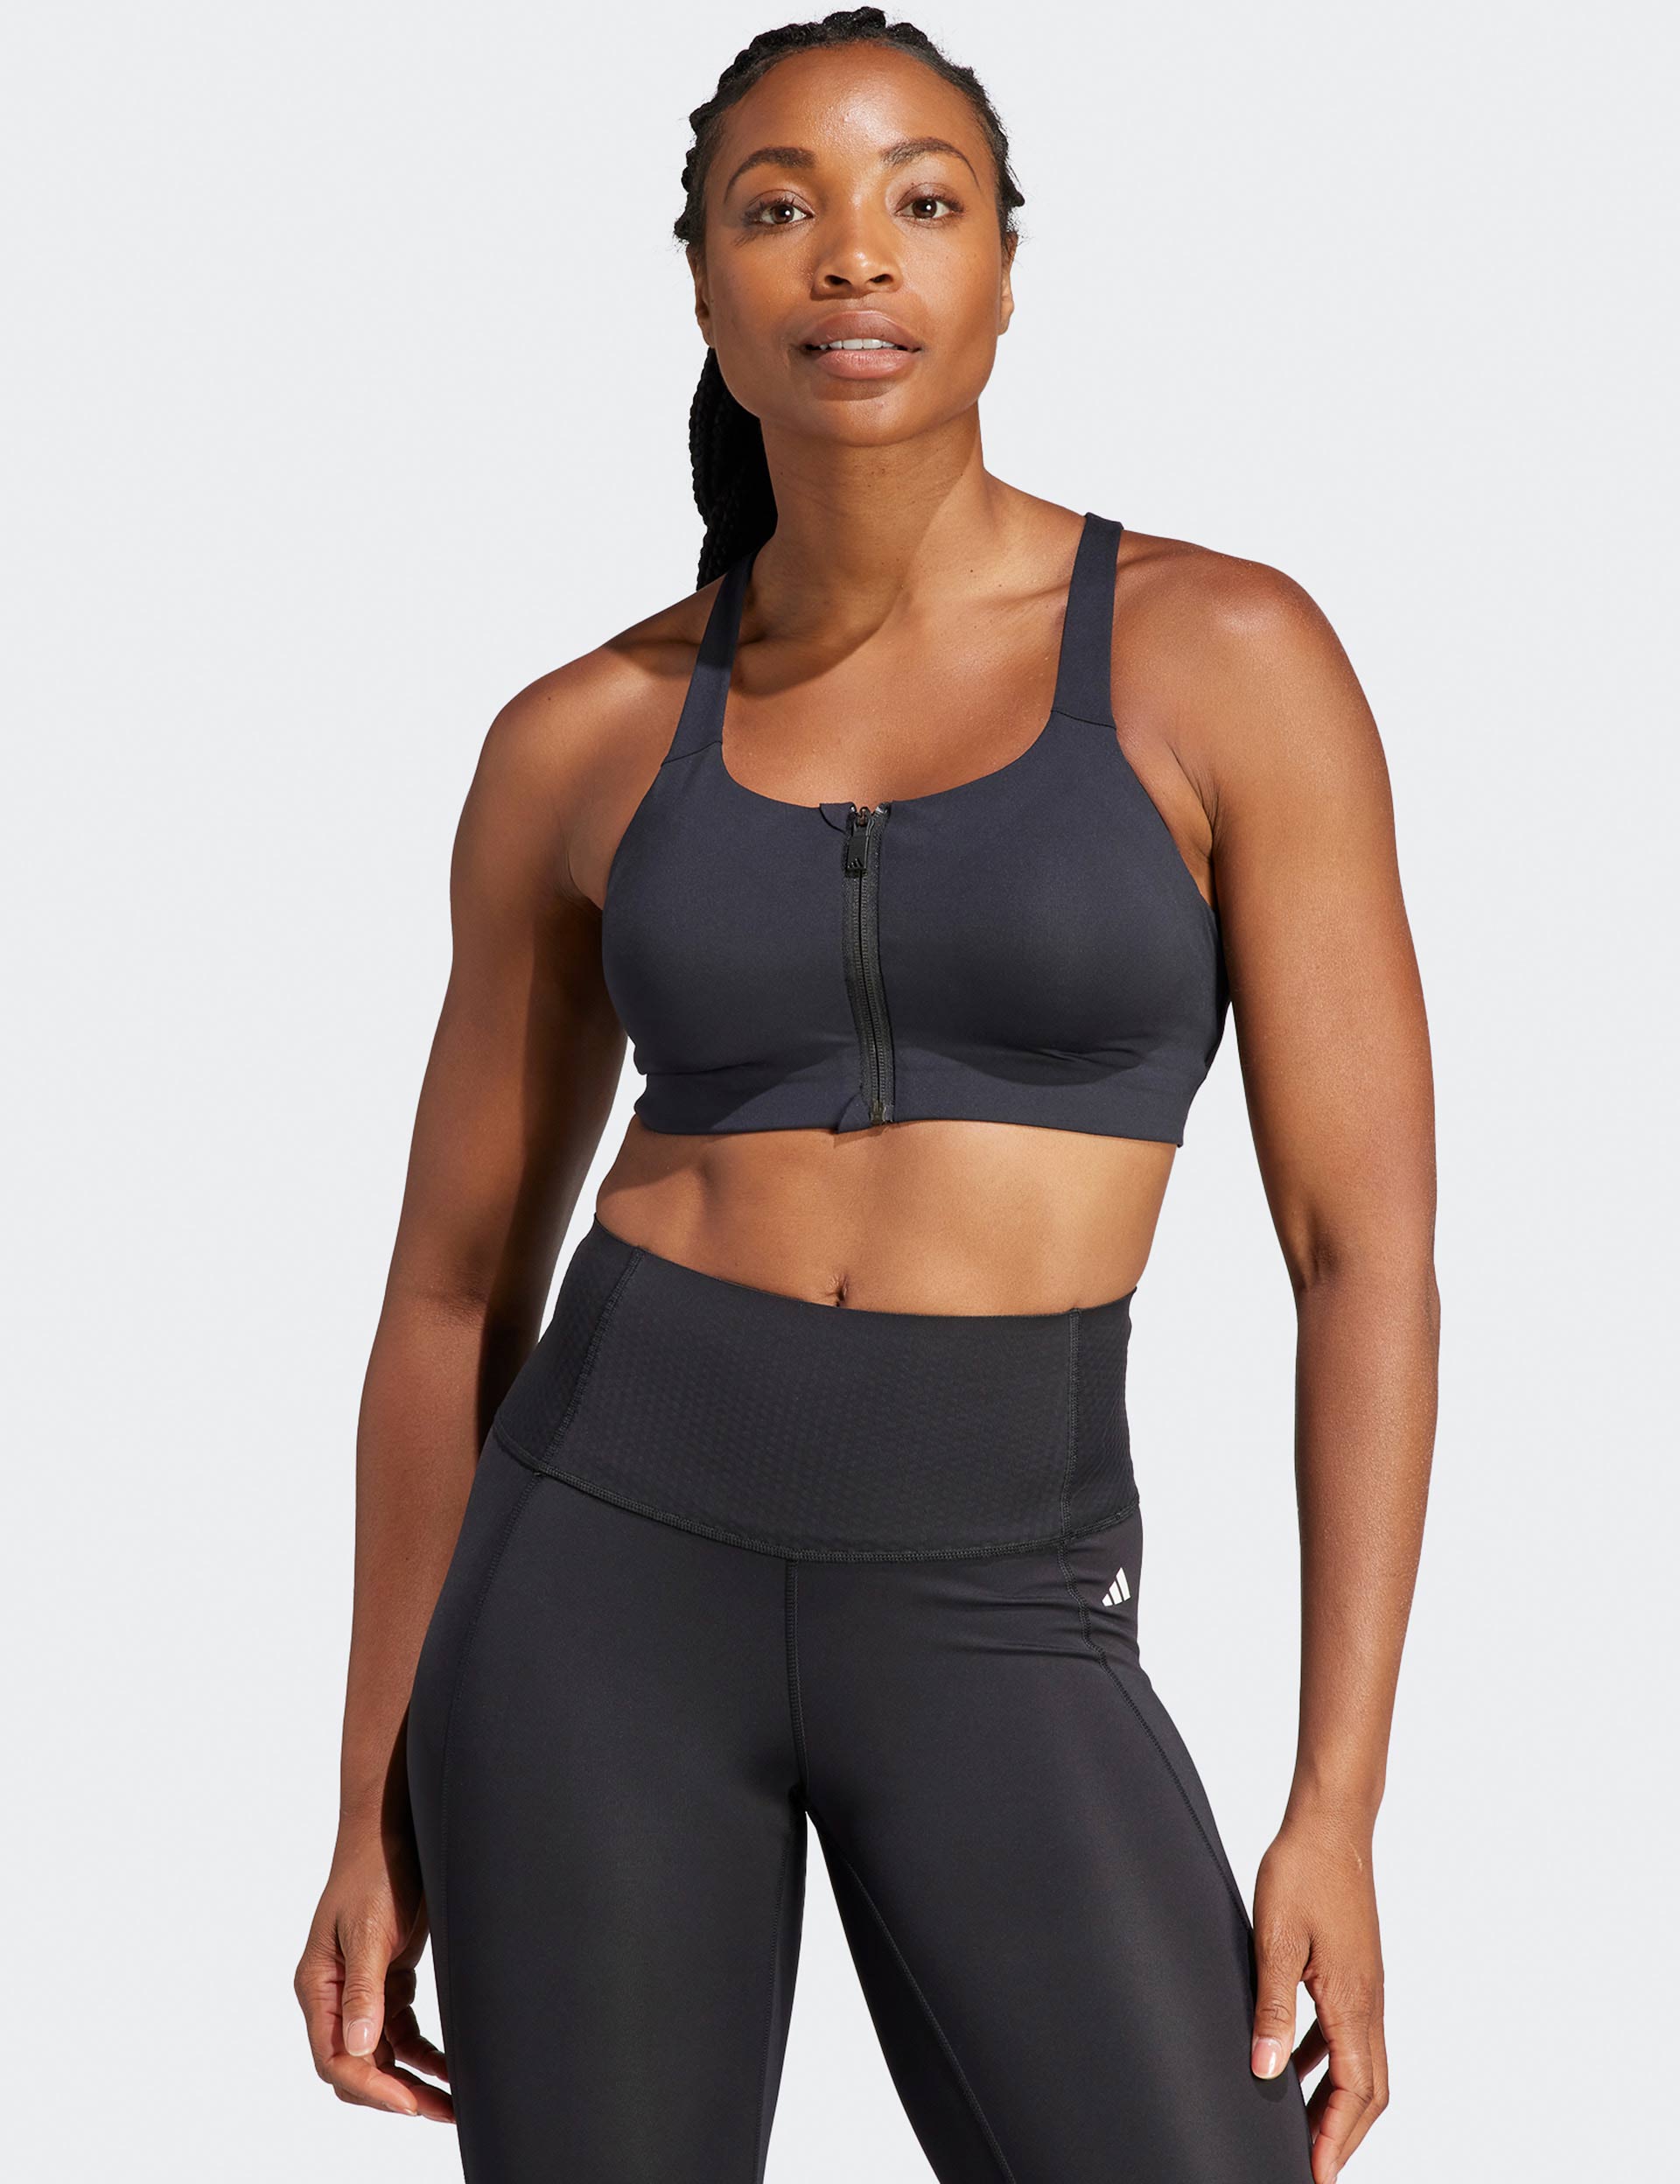 adidas TLRD Move Training High-Support Bra (Plus Size) - Black